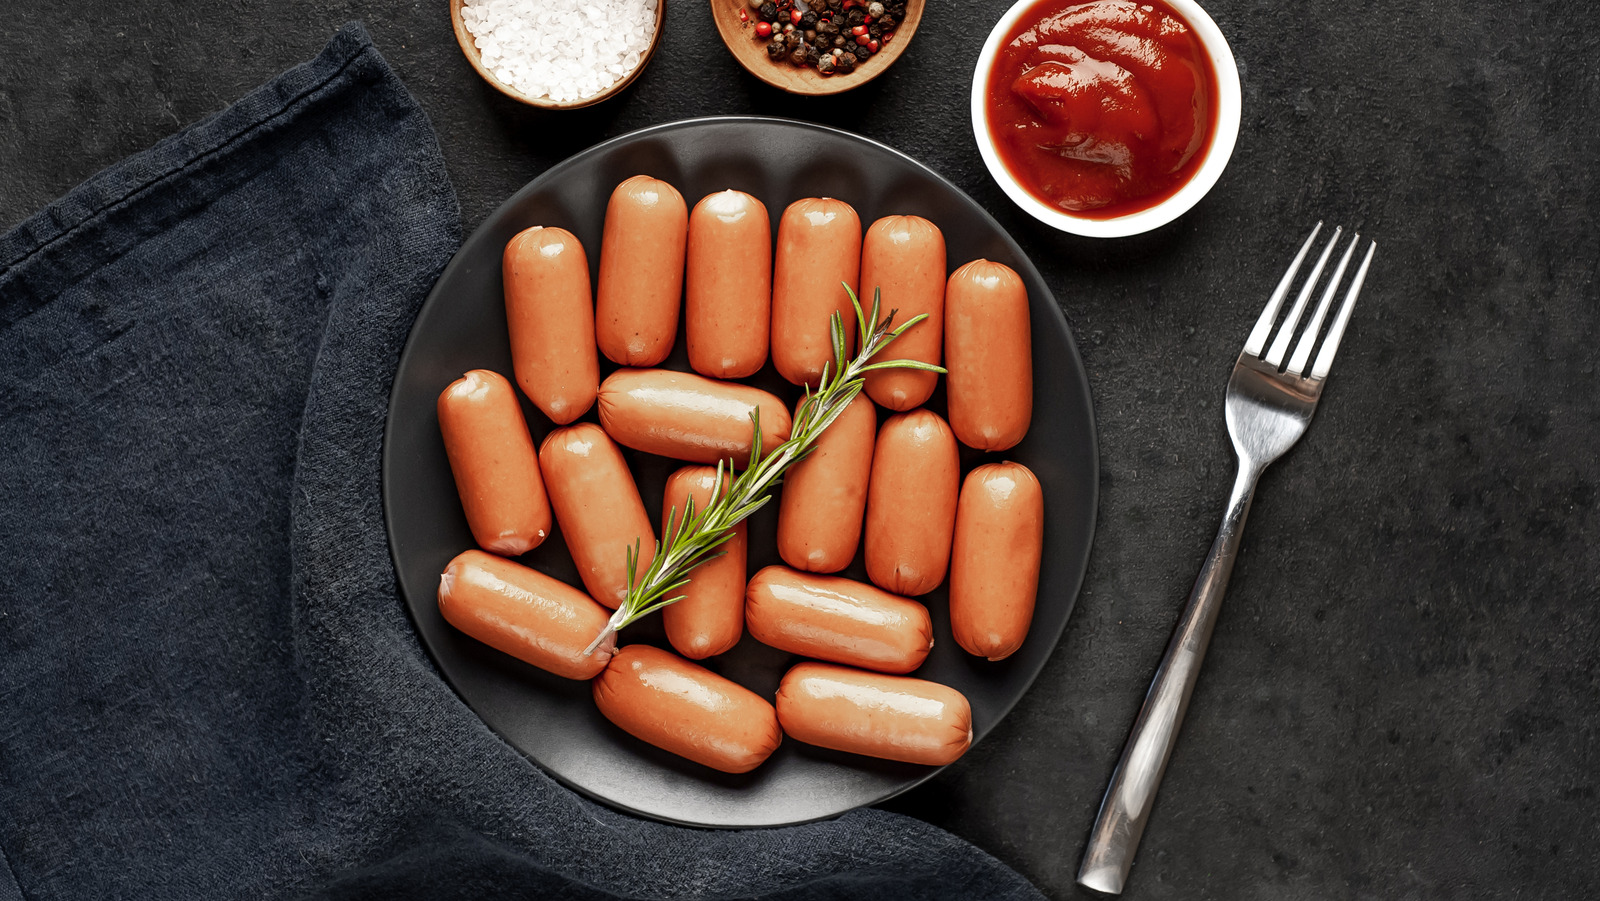 https://www.thedailymeal.com/img/gallery/canned-vienna-sausages-are-all-you-need-for-sophisticated-cocktail-franks/l-intro-1699562359.jpg